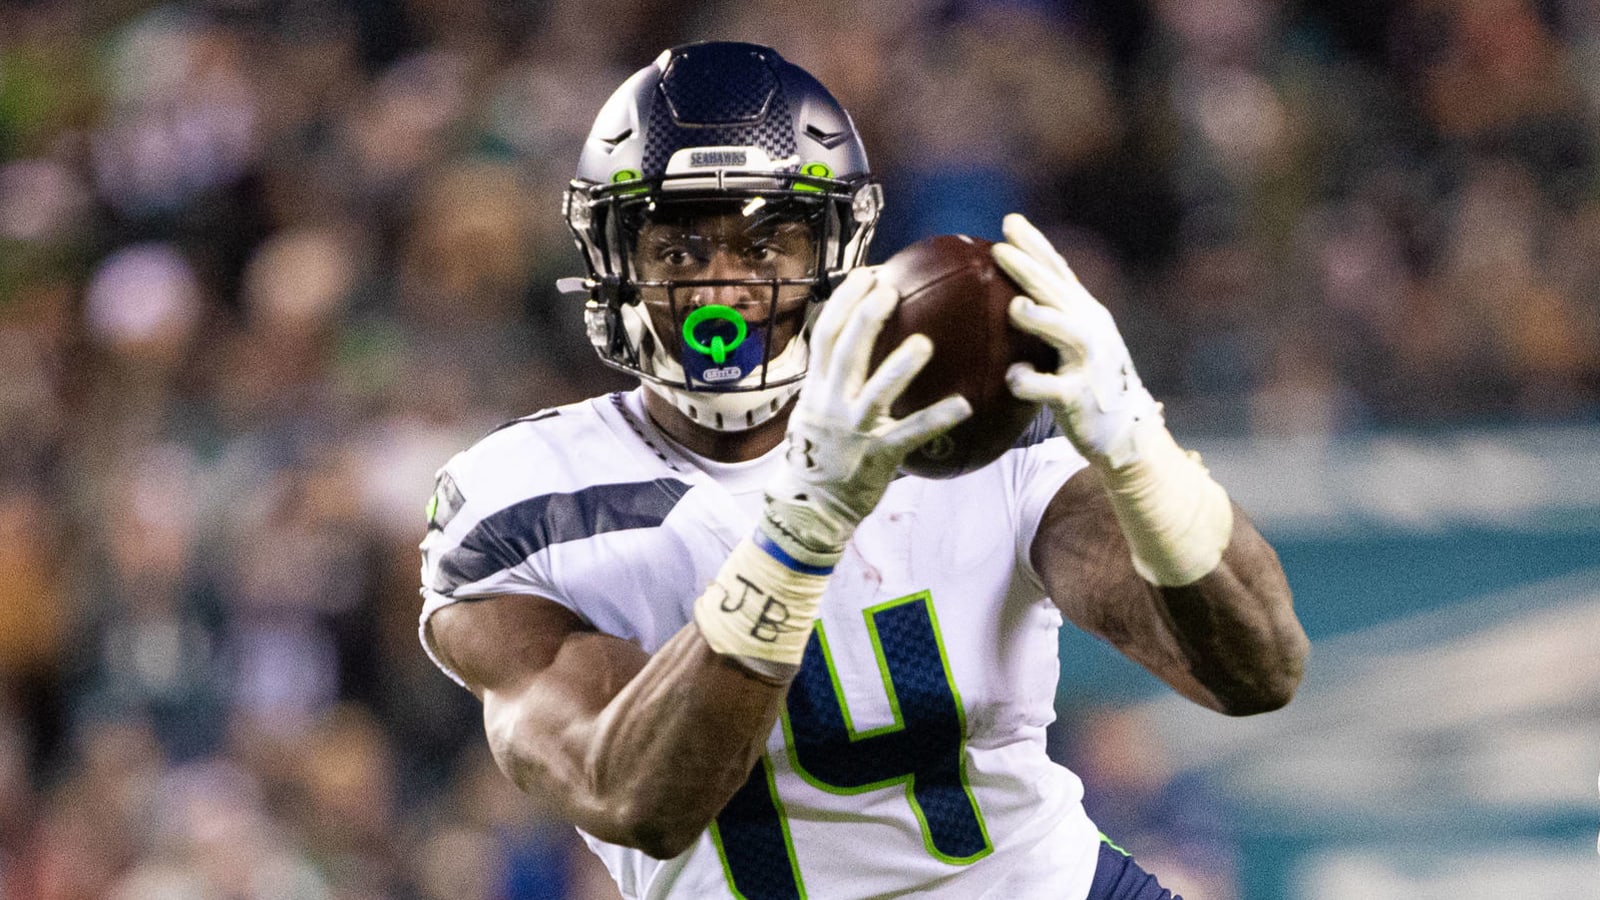 D.K. Metcalf flashes peace sign after big catch to seal Seahawks win